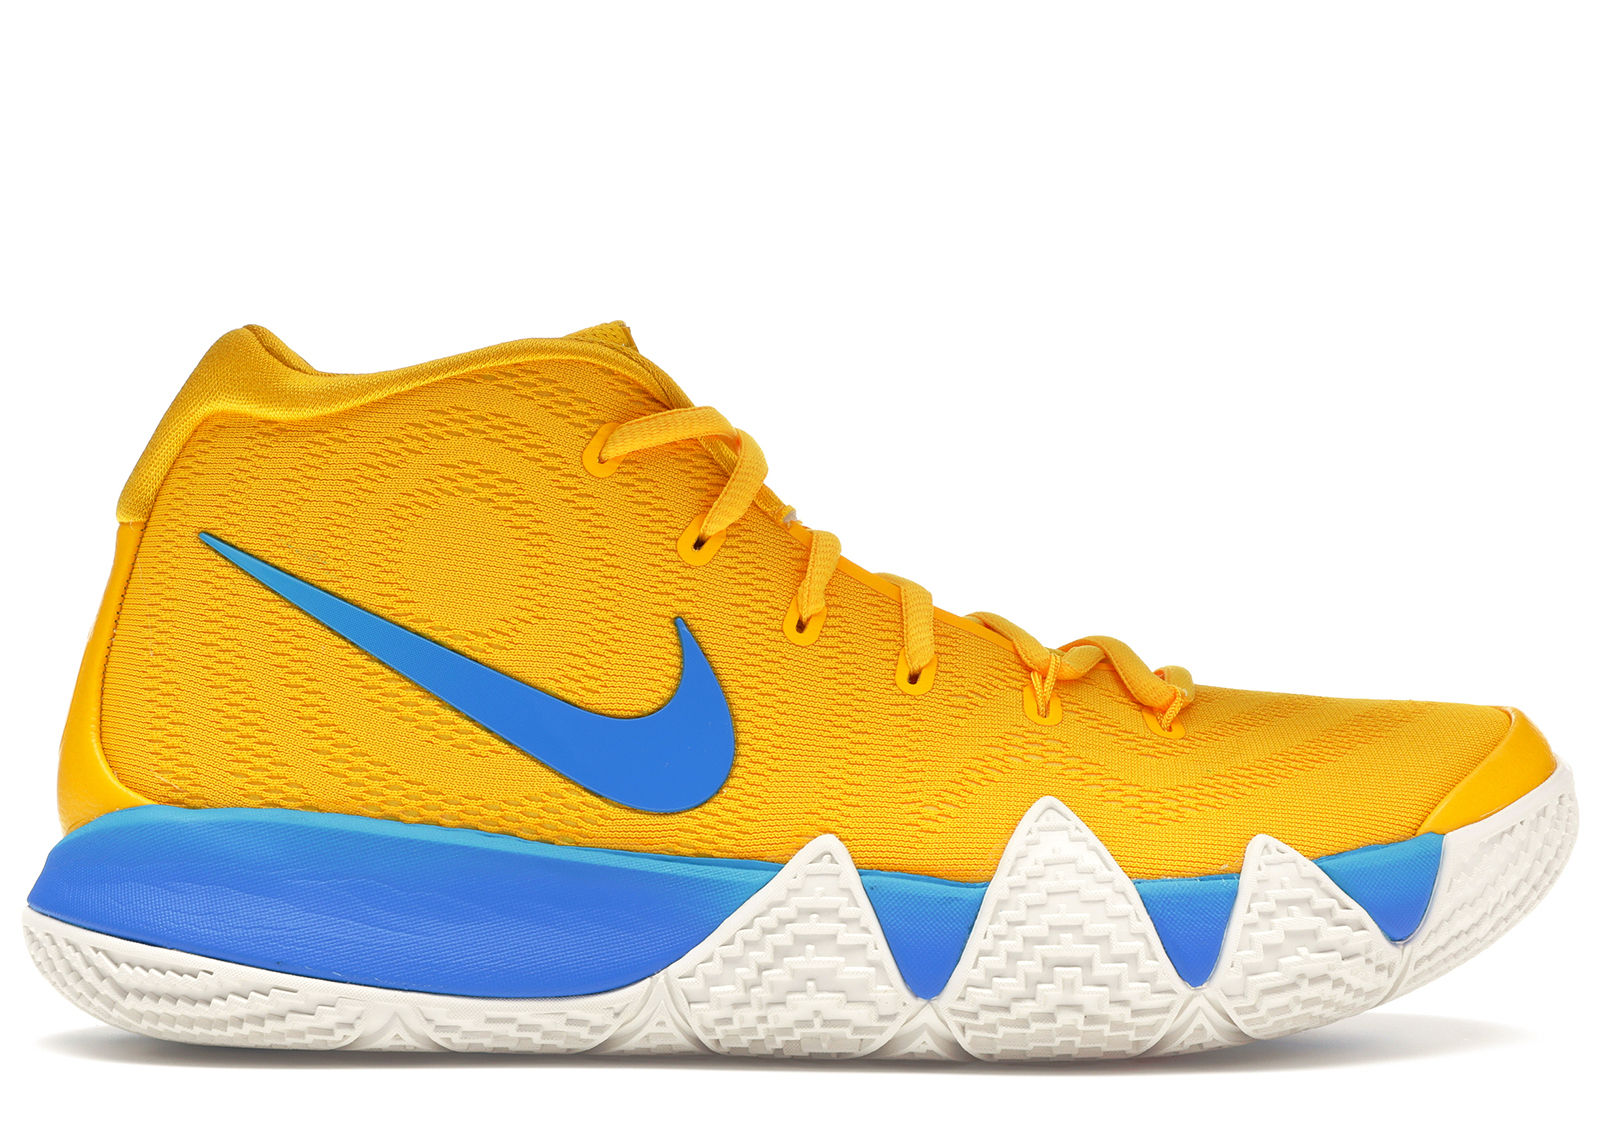 yellow kyrie 4